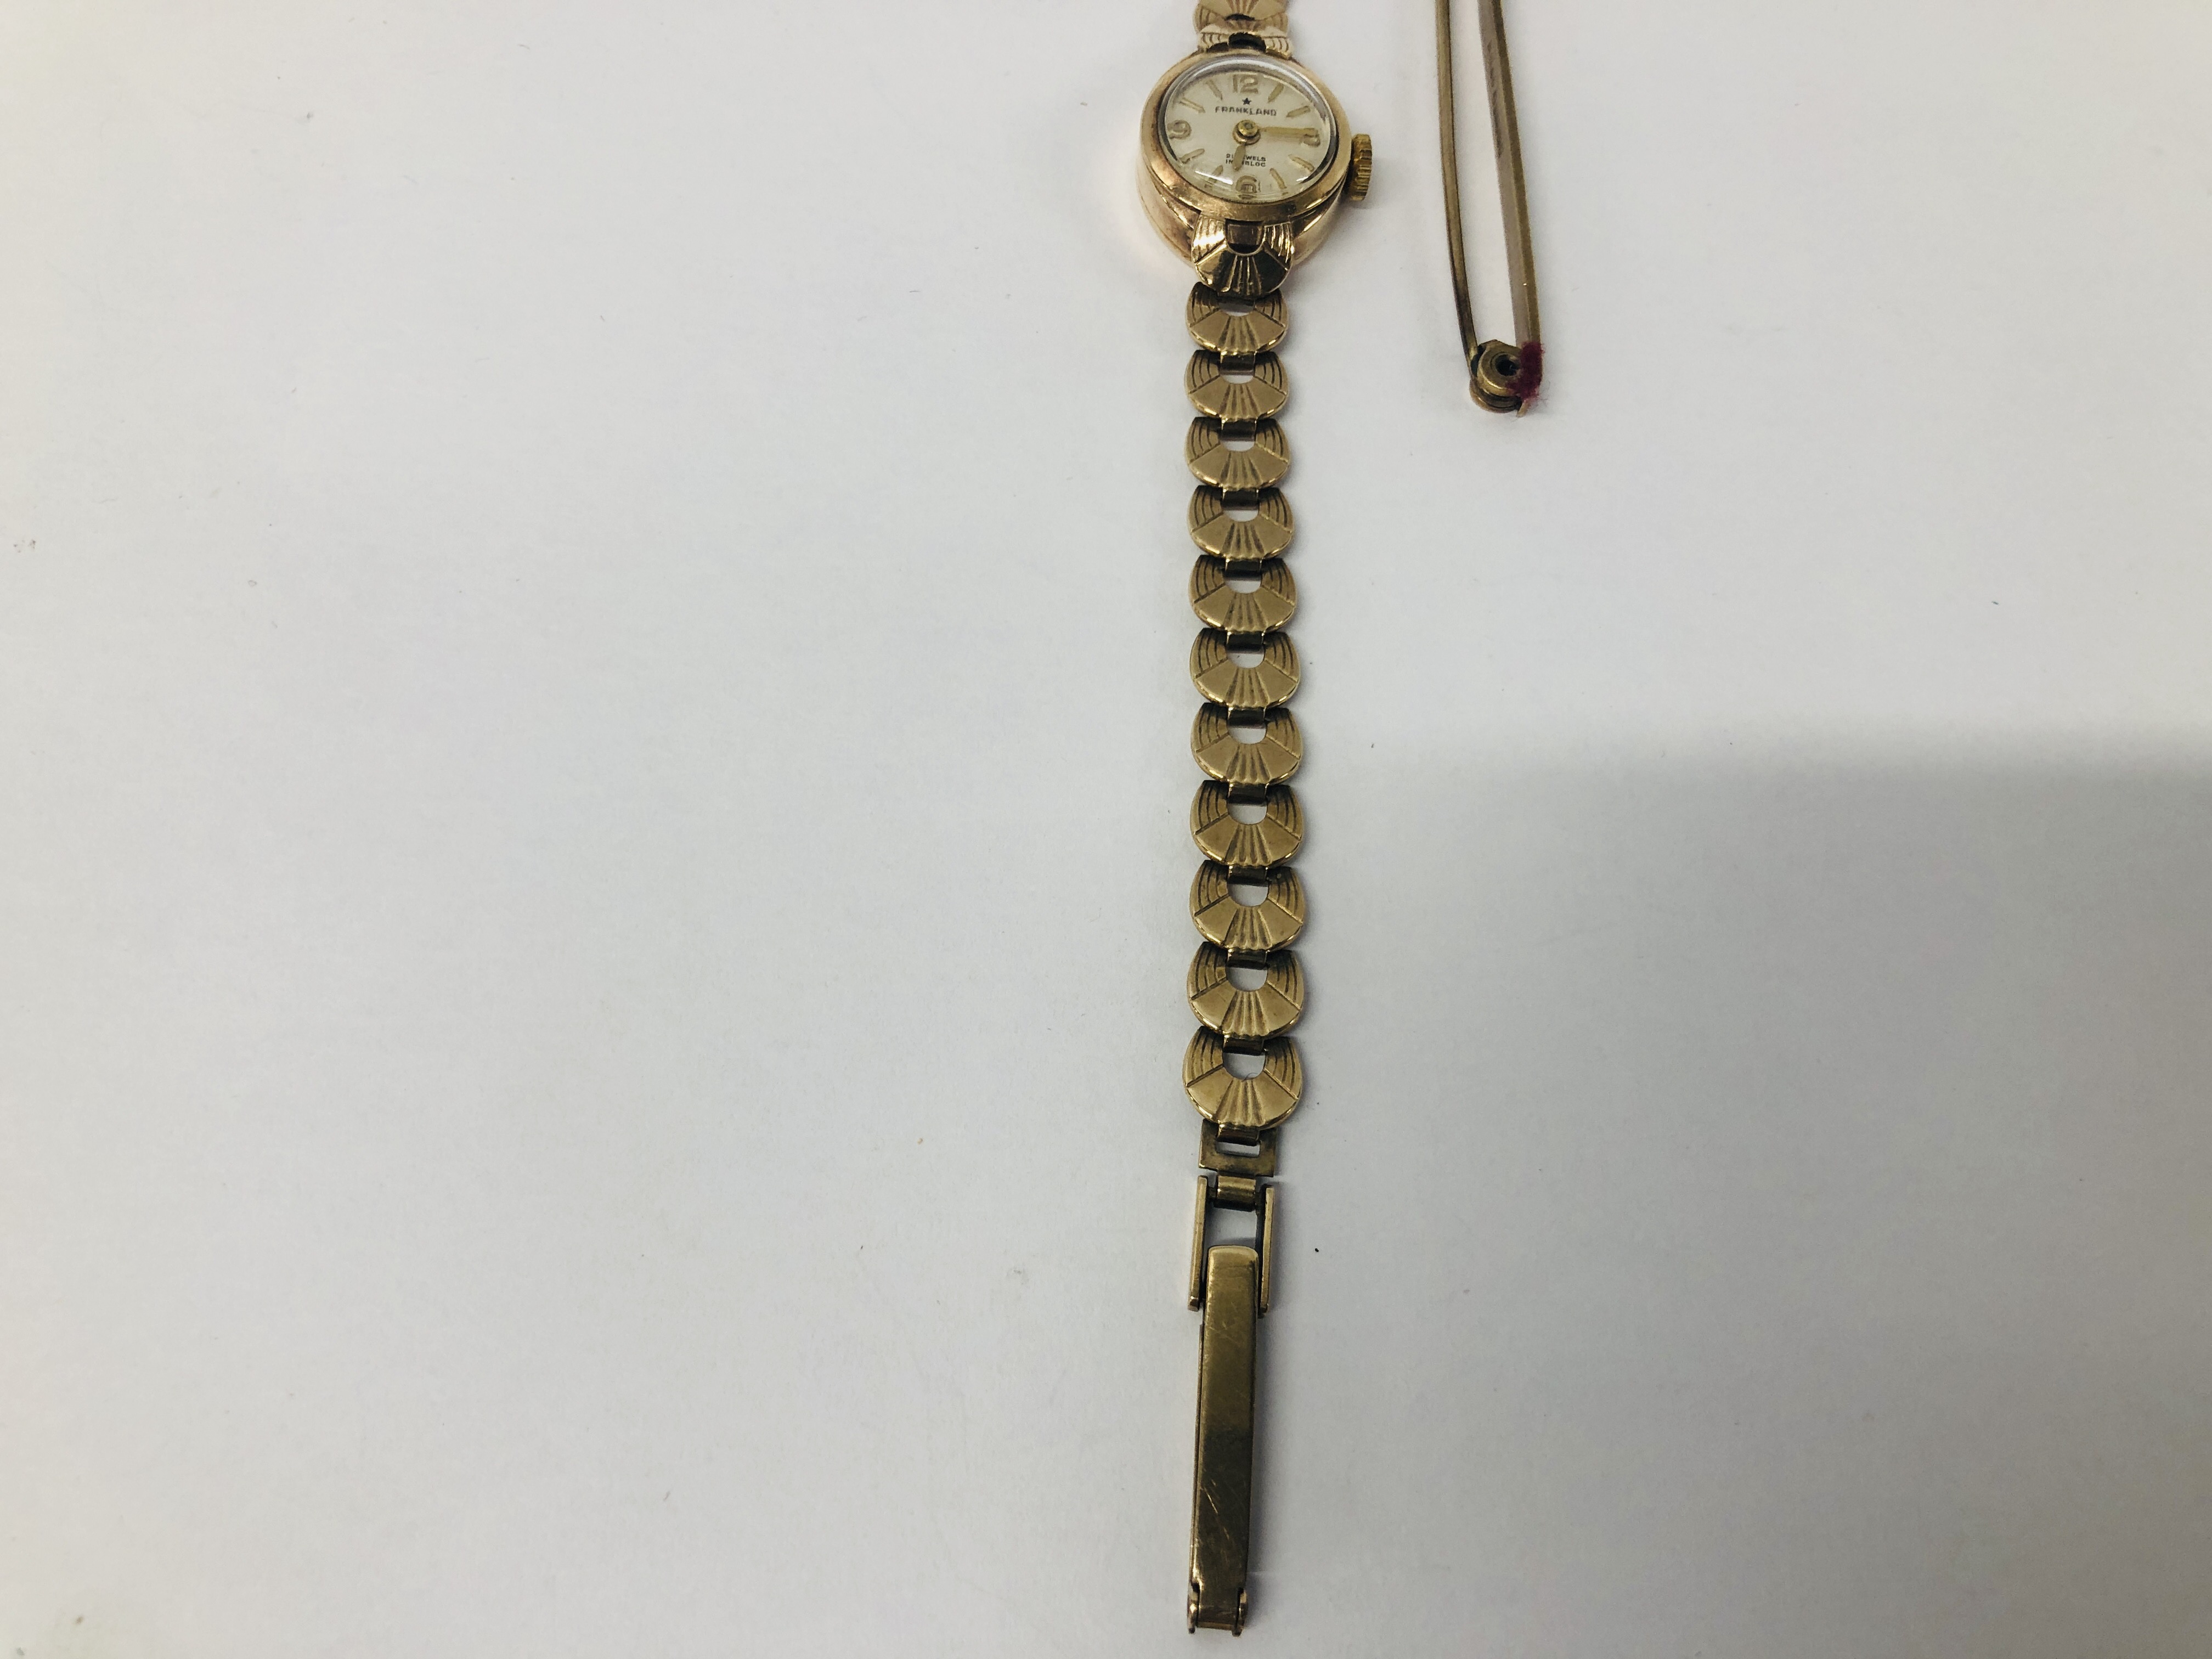 A LADIES 9CT GOLD CASED FRANKLAND WRIST WATCH ON 9CT GOLD BRACELET STRAP ALONG WITH A 9CT GOLD BAR - Image 11 of 14